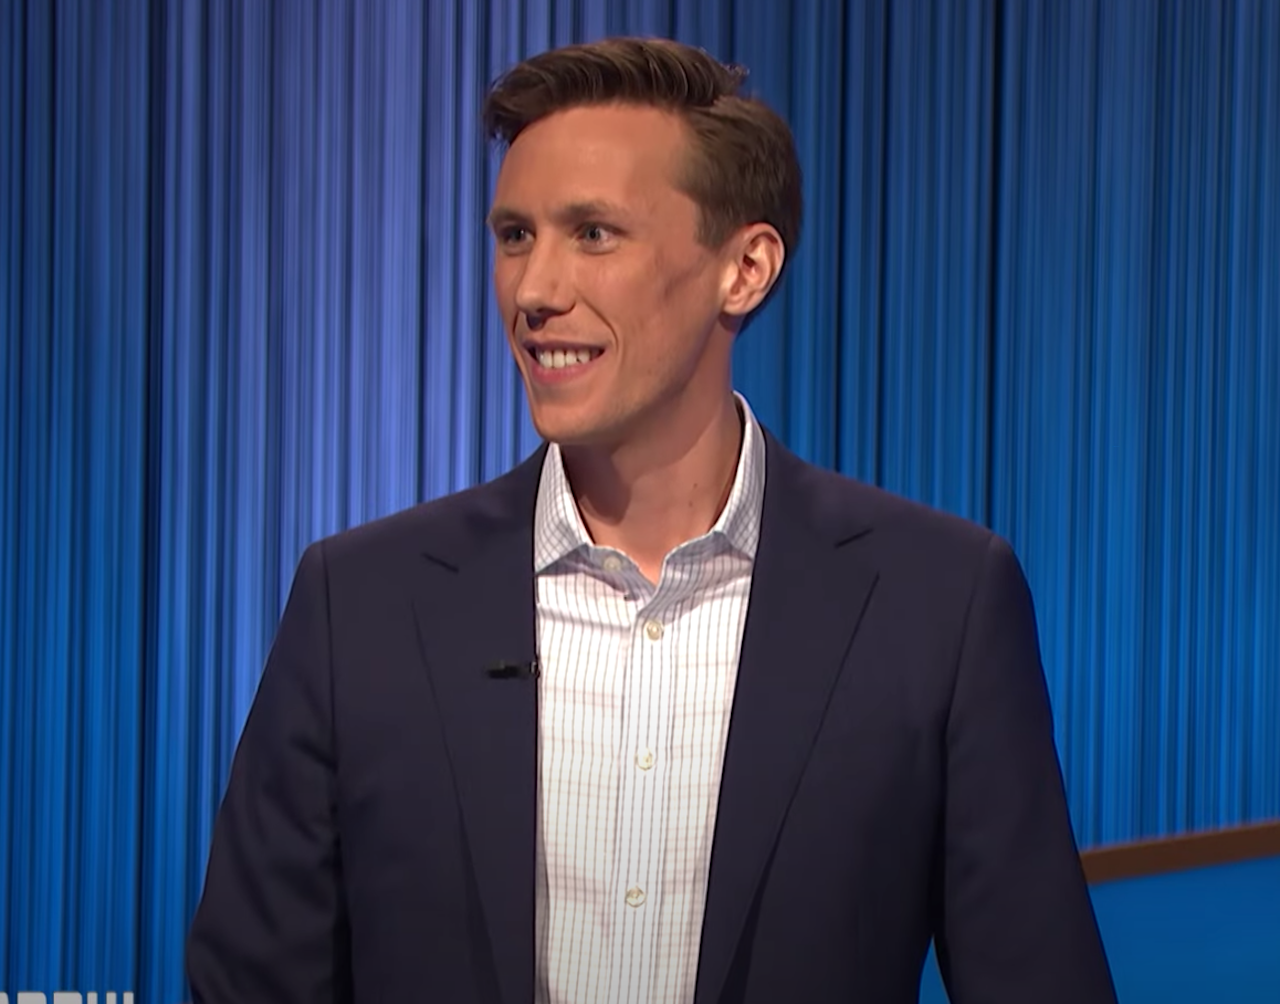 ‘Jeopardy!’ Champ Eric Ahasic Tells Future Players ‘Nothing Prepares You For the Buzzer’